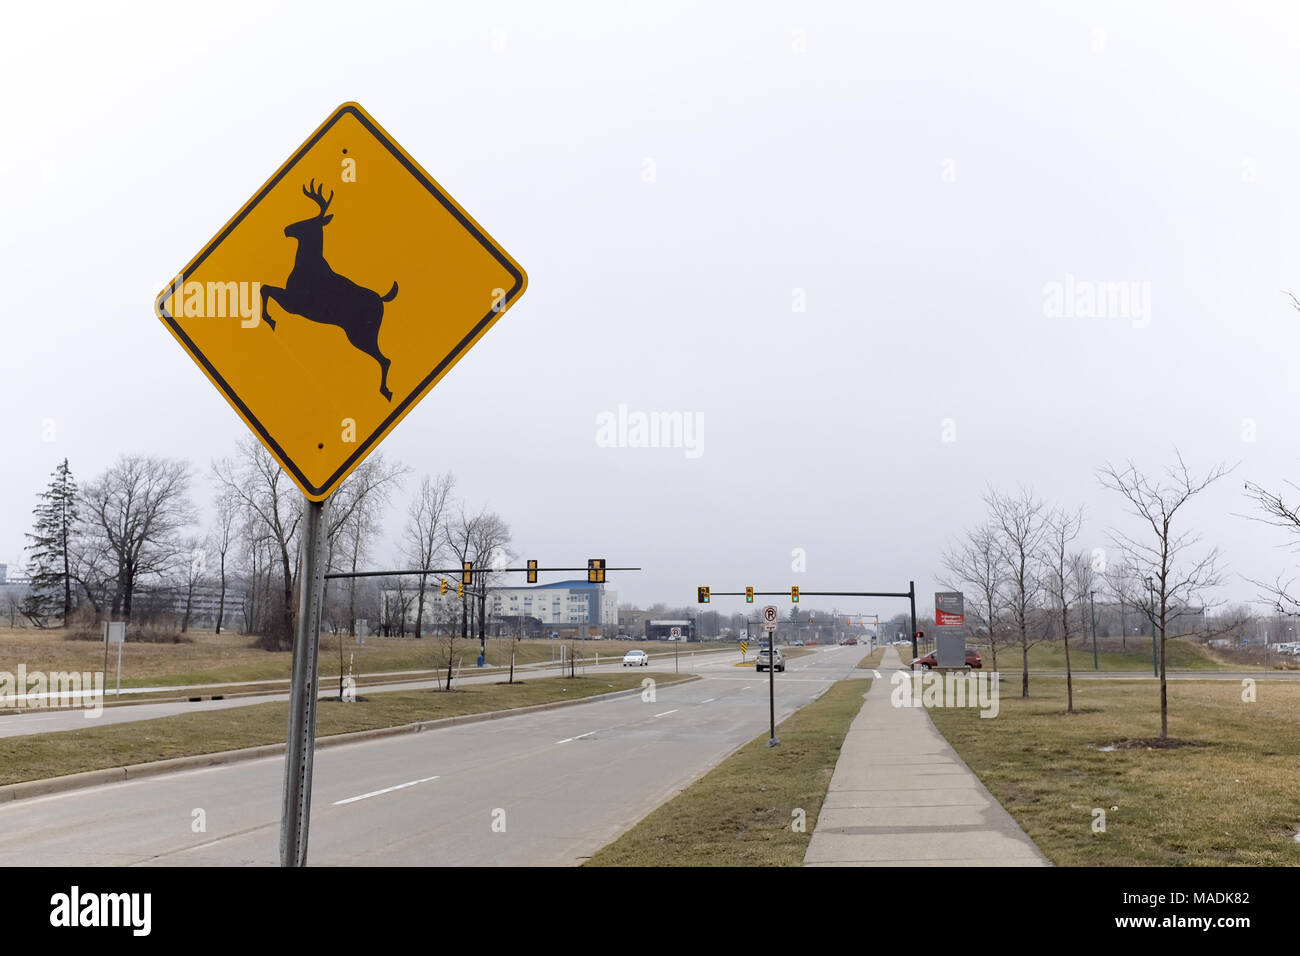 A deer crossing sign is posted in a rapidly developing suburb of Cleveland, Ohio, USA. Stock Photo